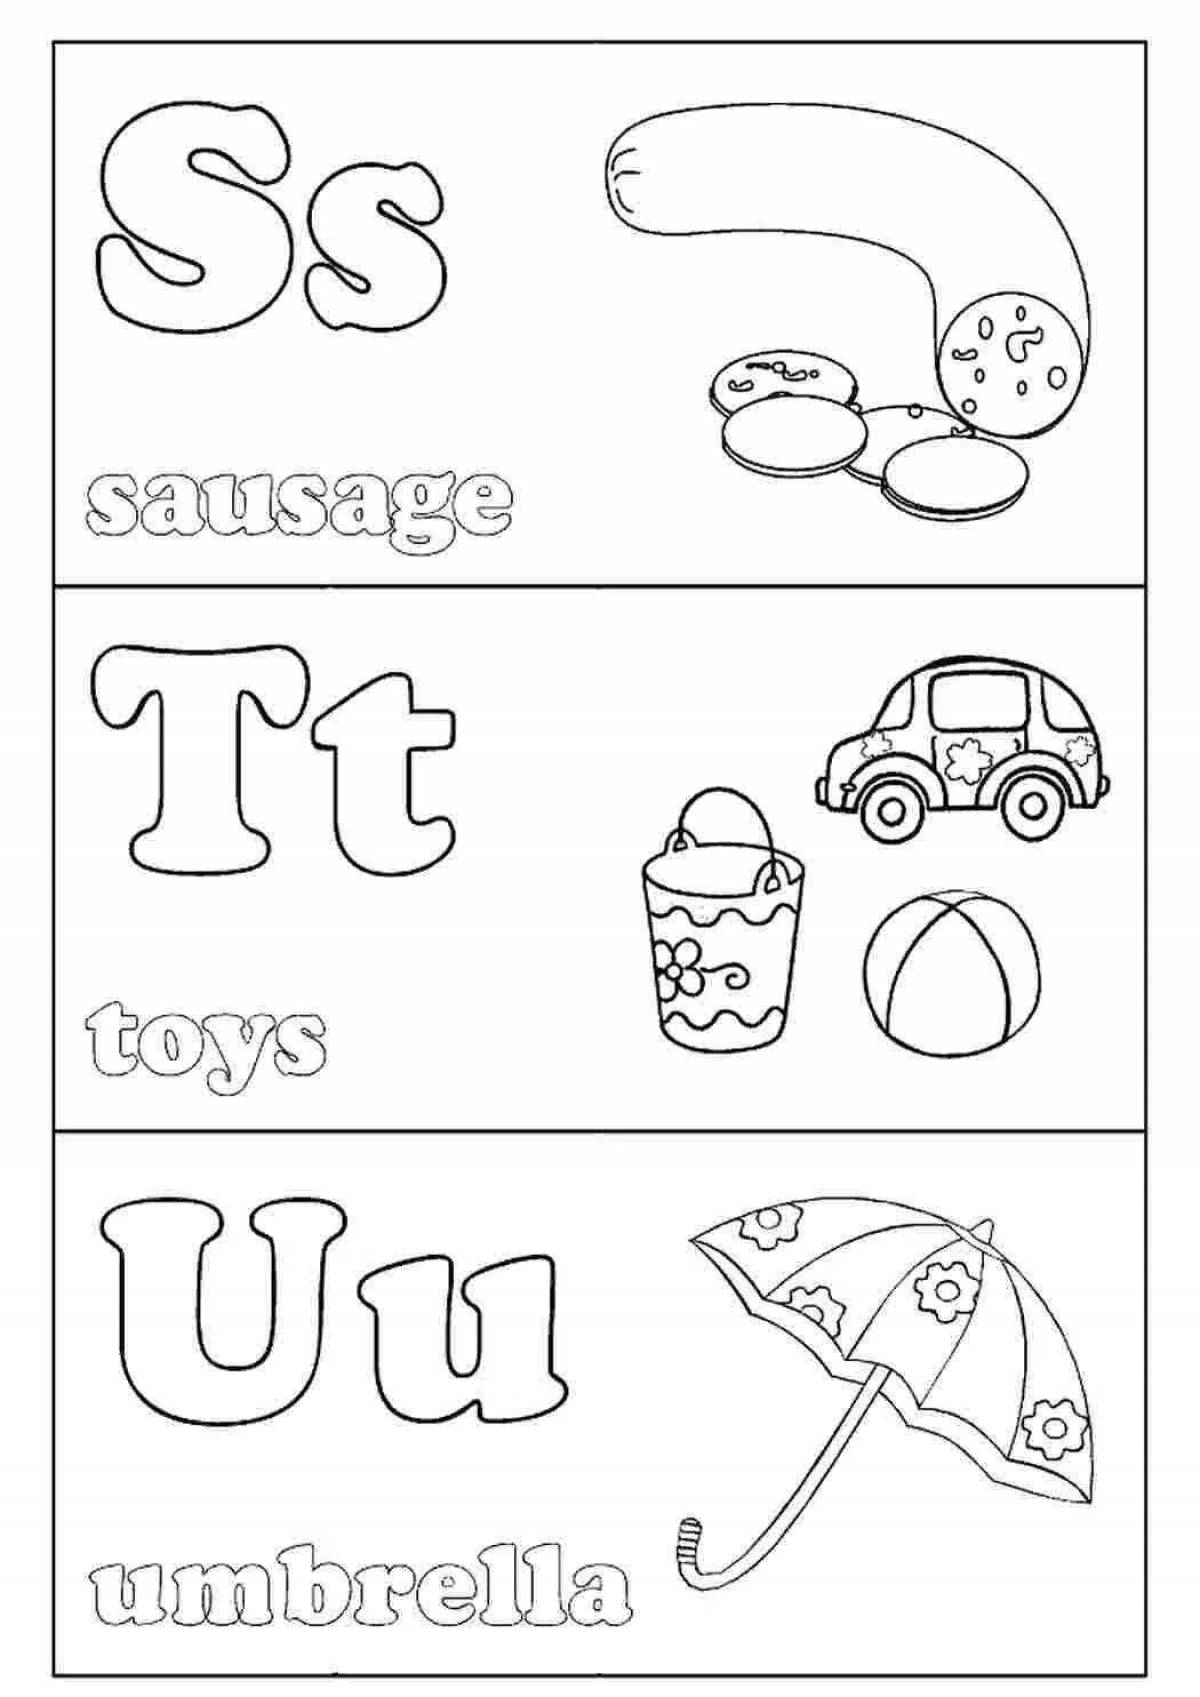 Colorful english letters coloring page for little ones